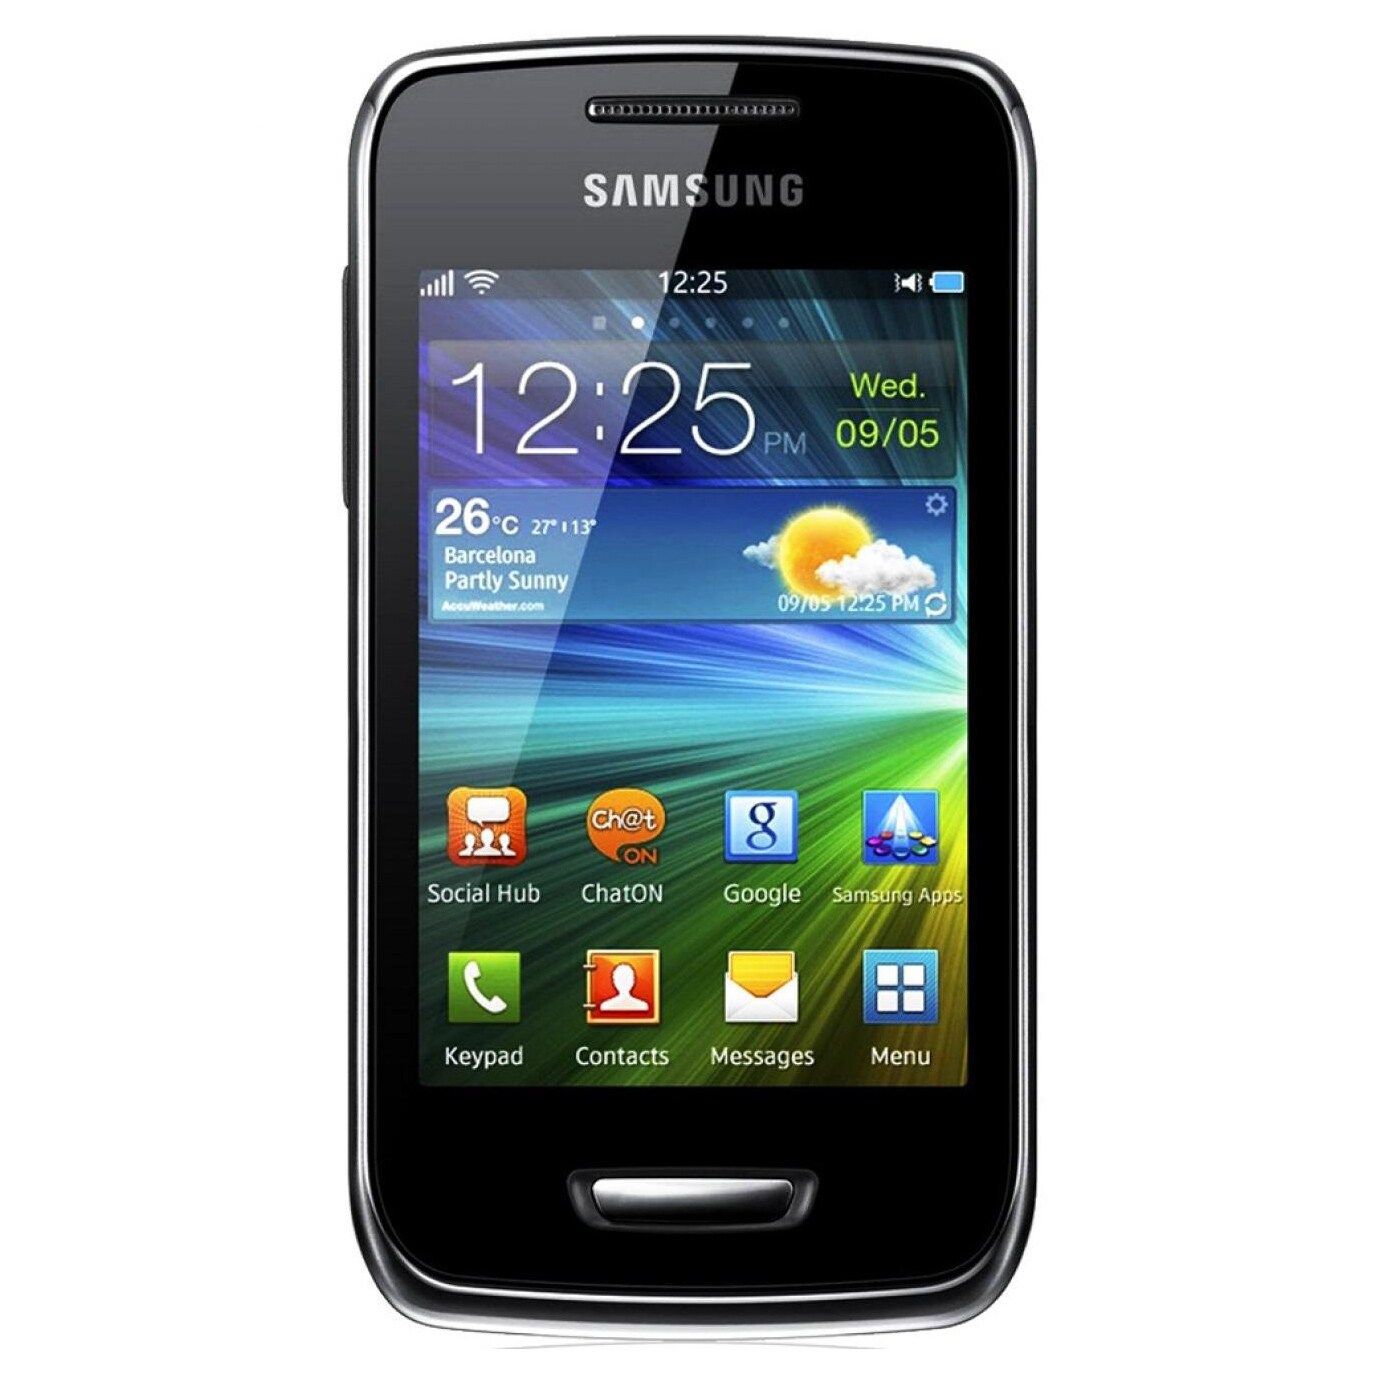 S5380 GSM Unlocked Bada OS 2.0 Cell Phone Today $139.49